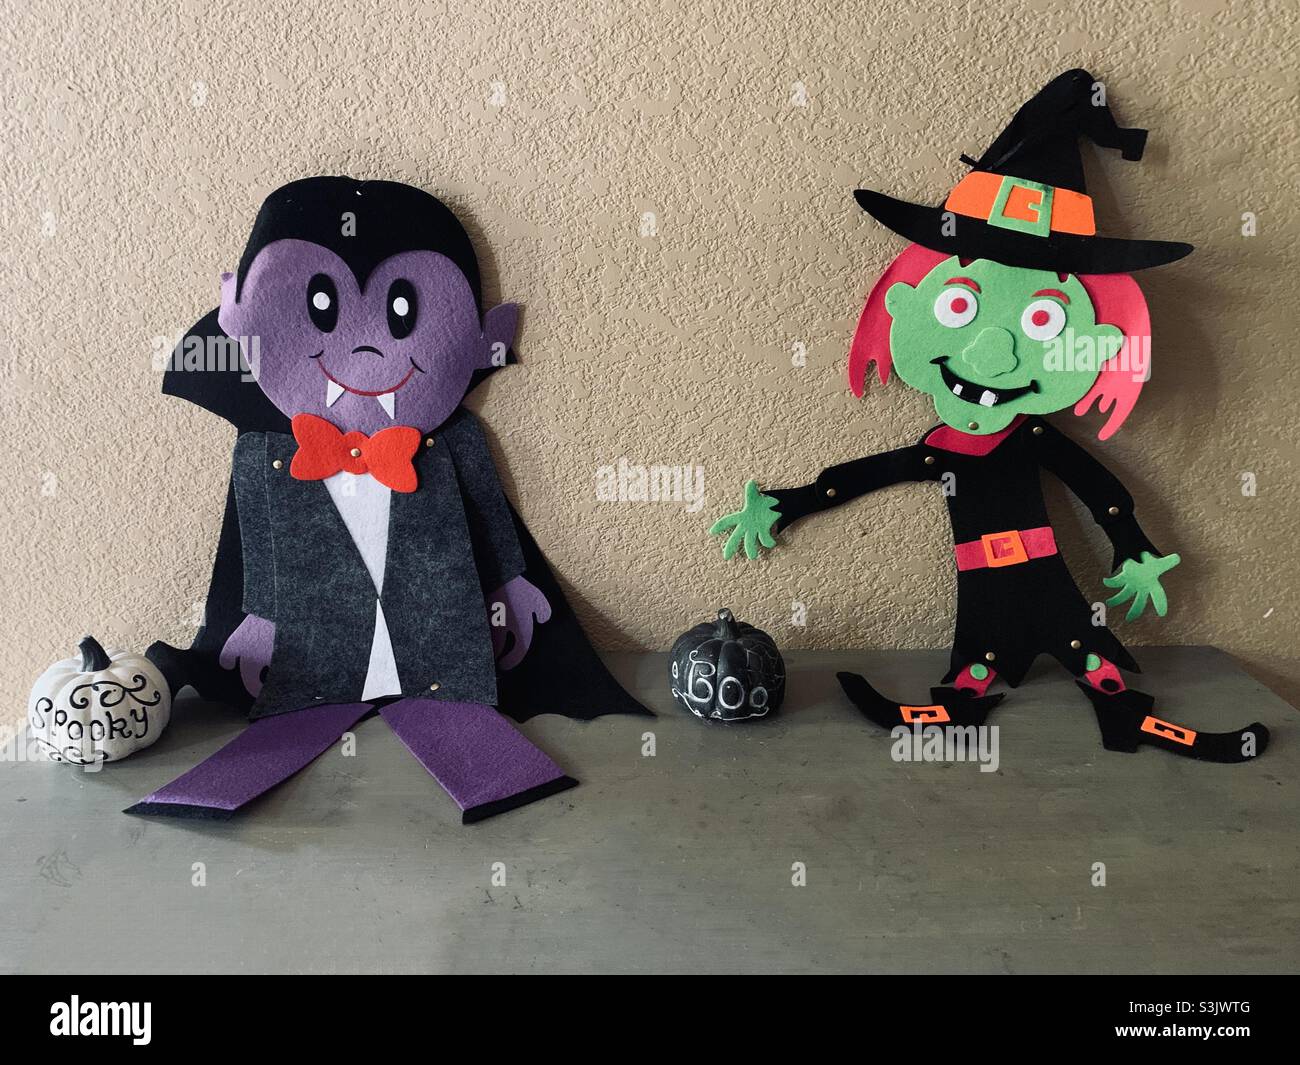 Halloween vampire, witch and pumpkins on display Stock Photo